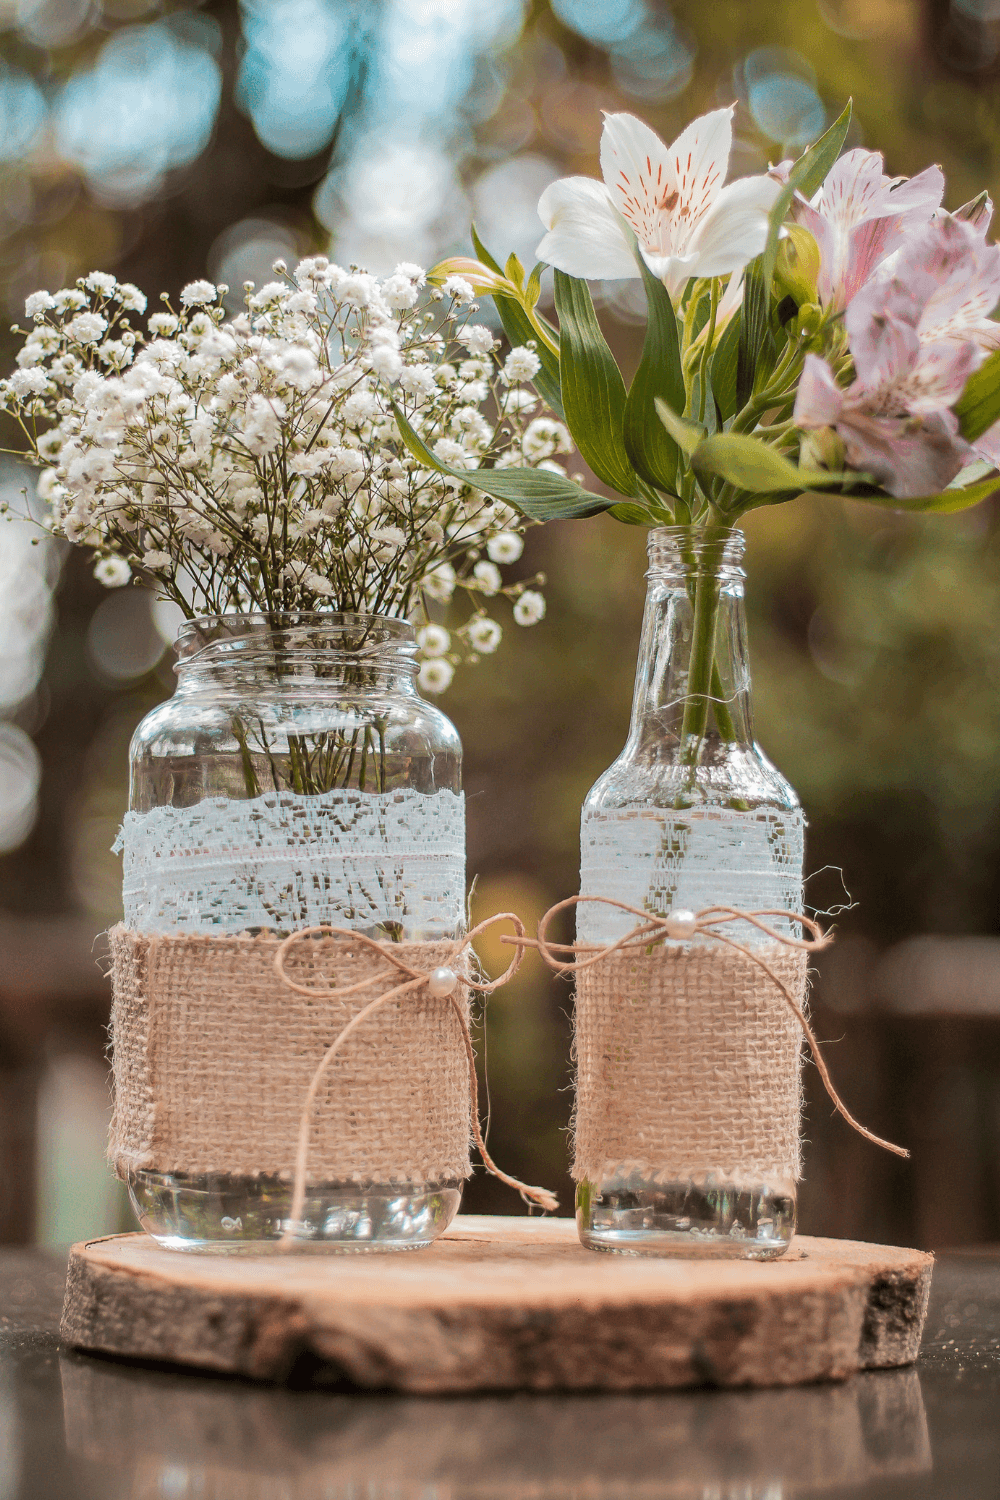 DIY Etched Mason Jar Drinking Glasses. These were made for a bachelorette  party. Many fun possibilities!